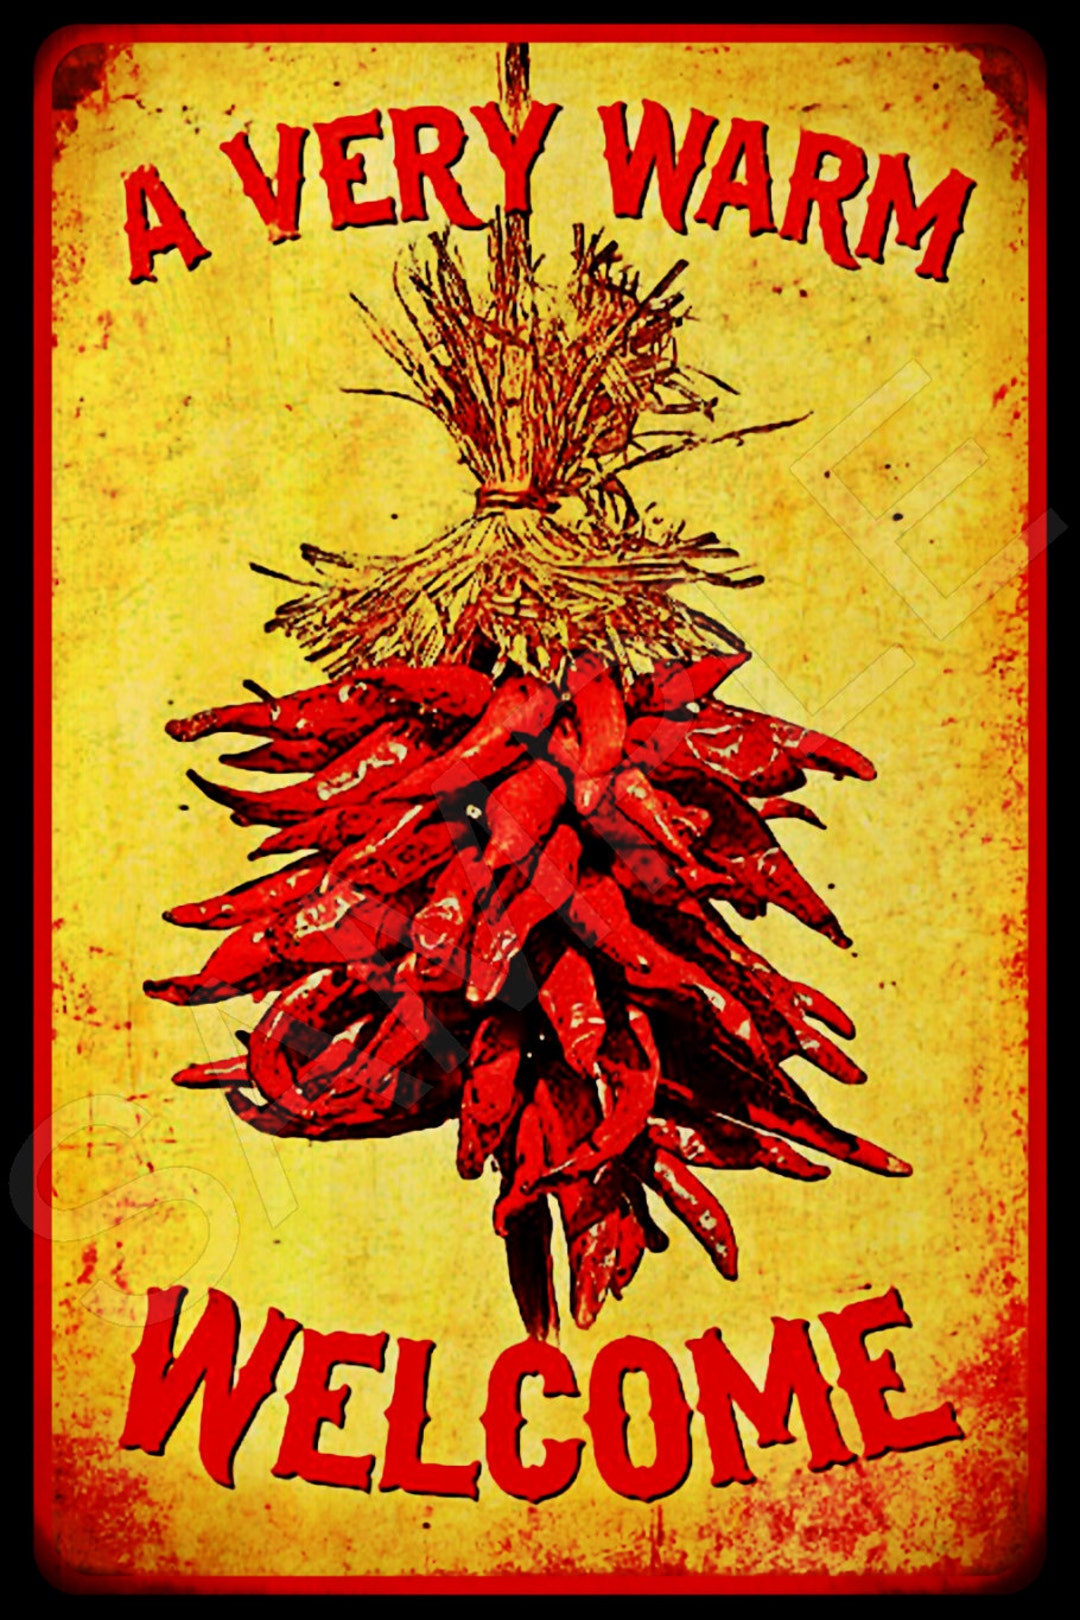 A Very Warm Welcome Distressed All Weather 8x12 Metal Sign Made in USA Cabin  Rustic Southwestern Chili Pepper New Mexico Santa Fe Ristra -  Canada